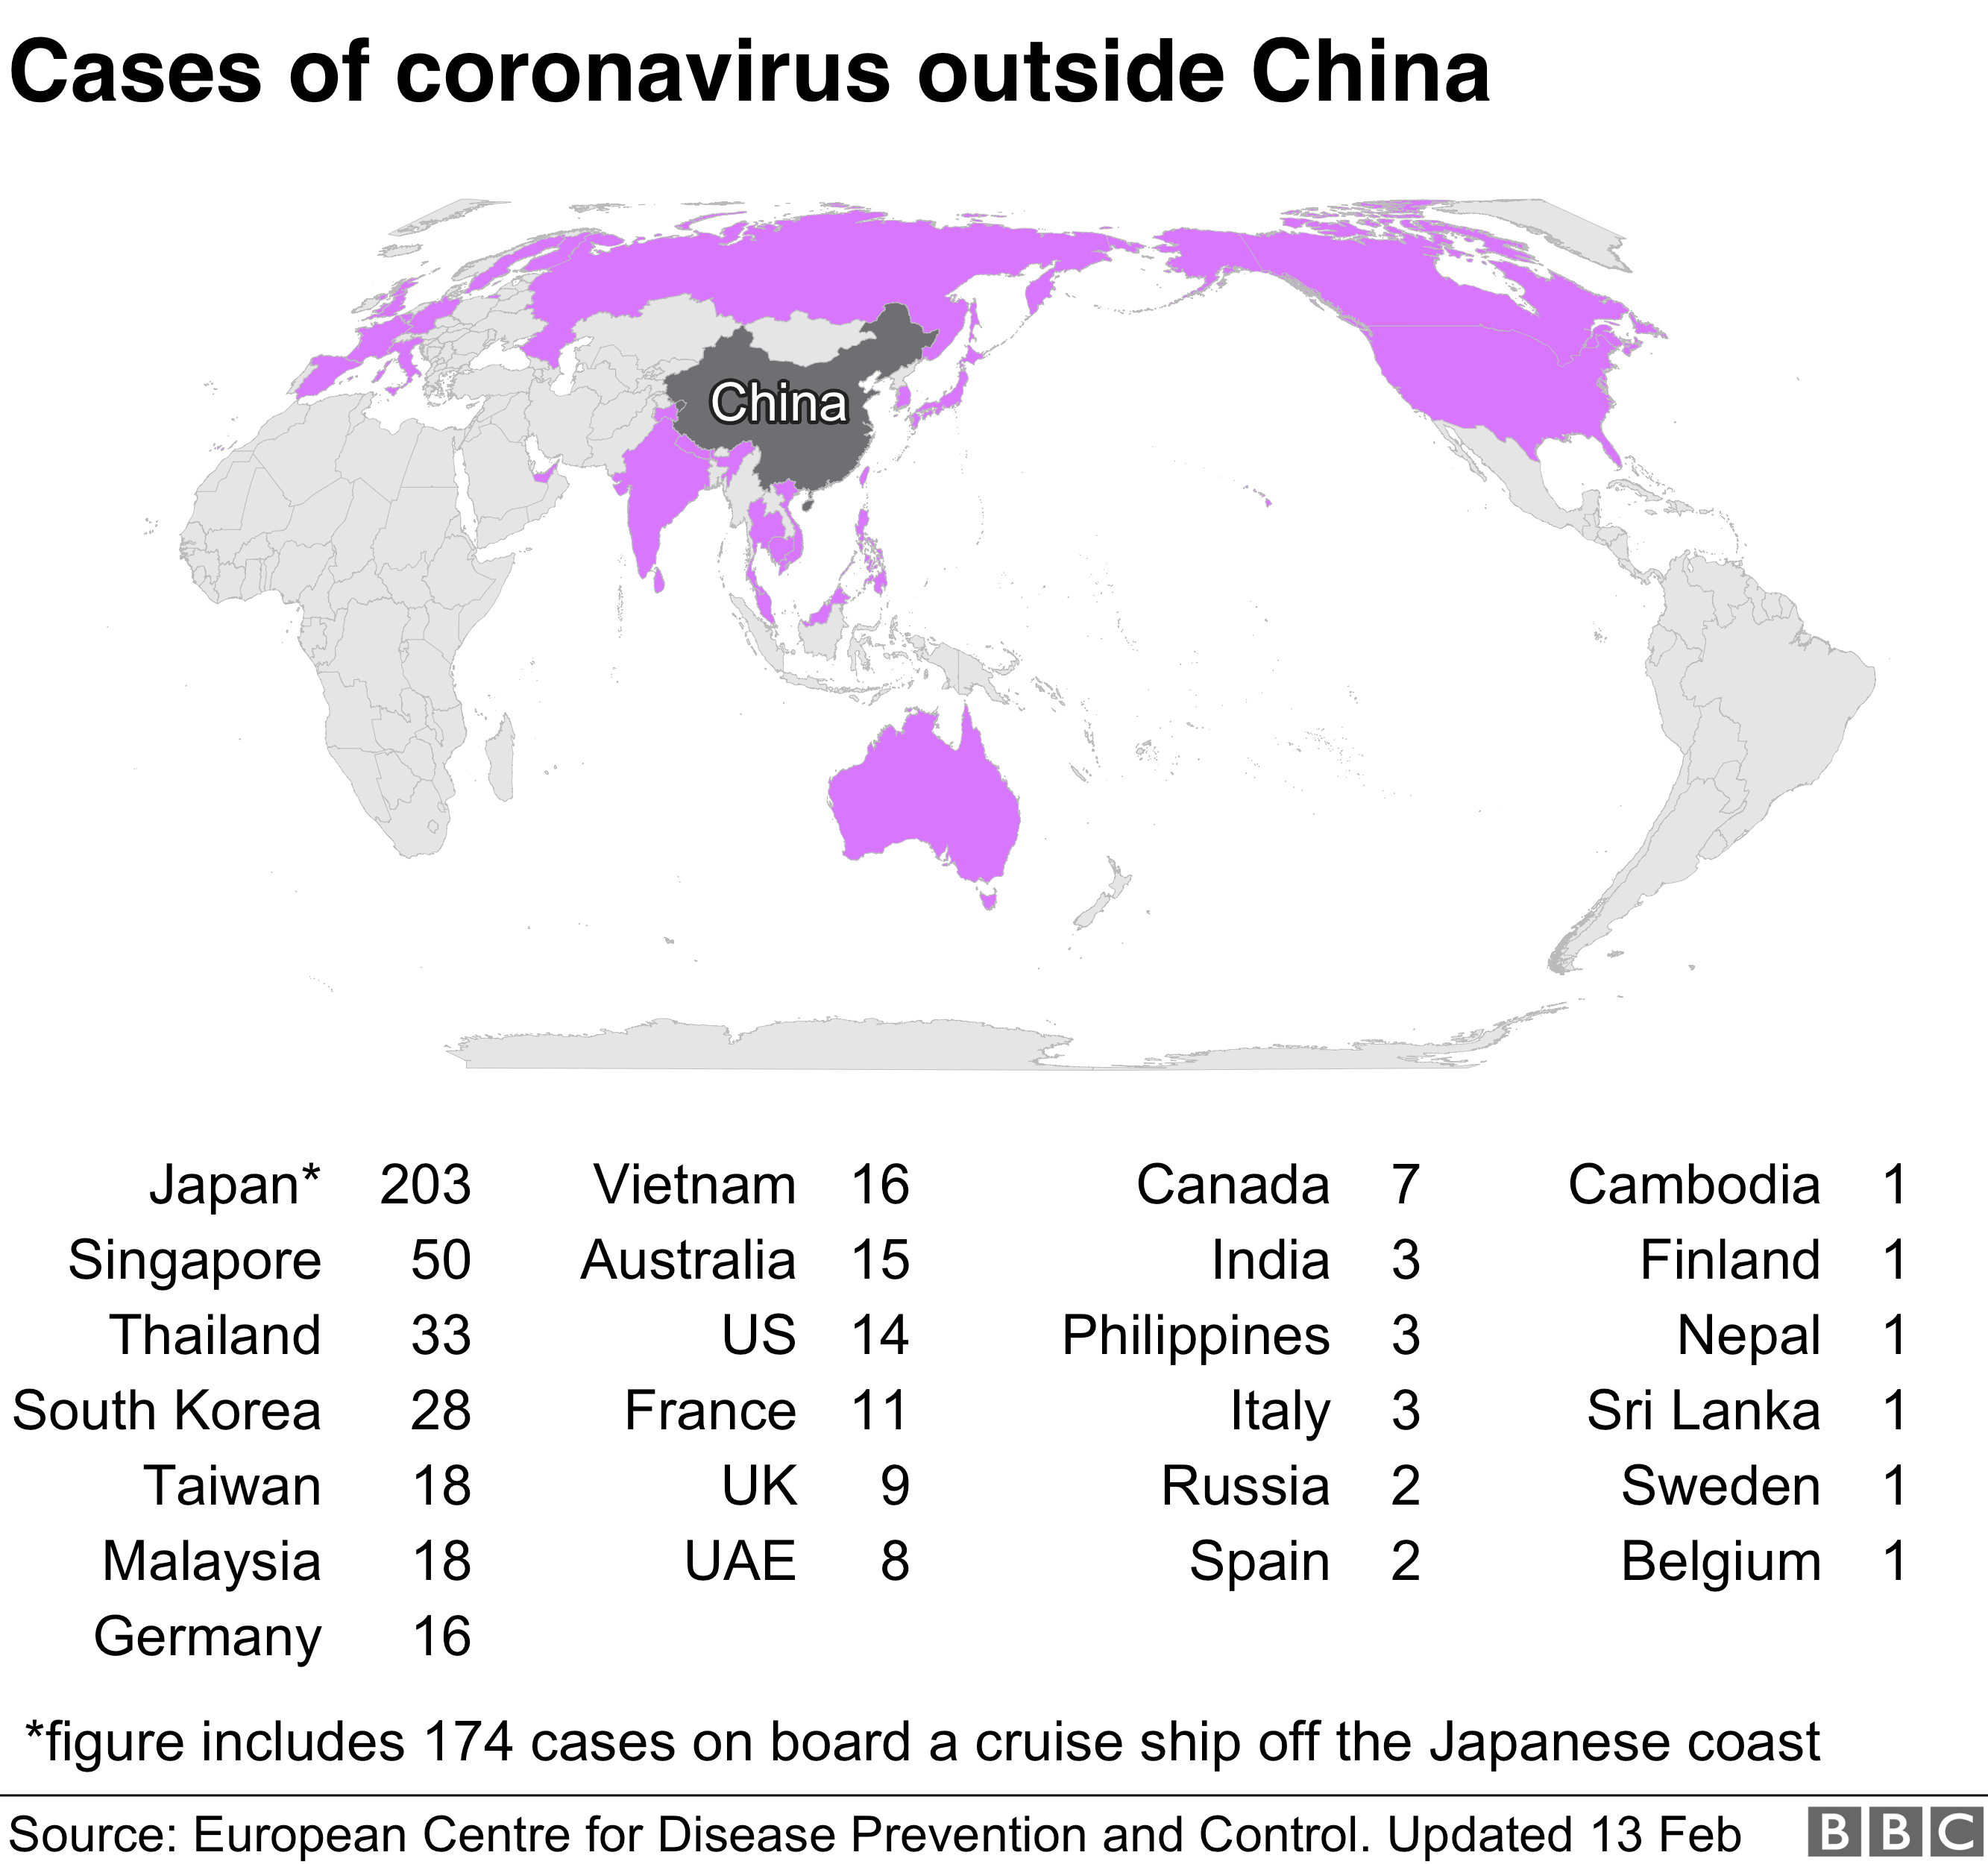 Cases reported worldwide